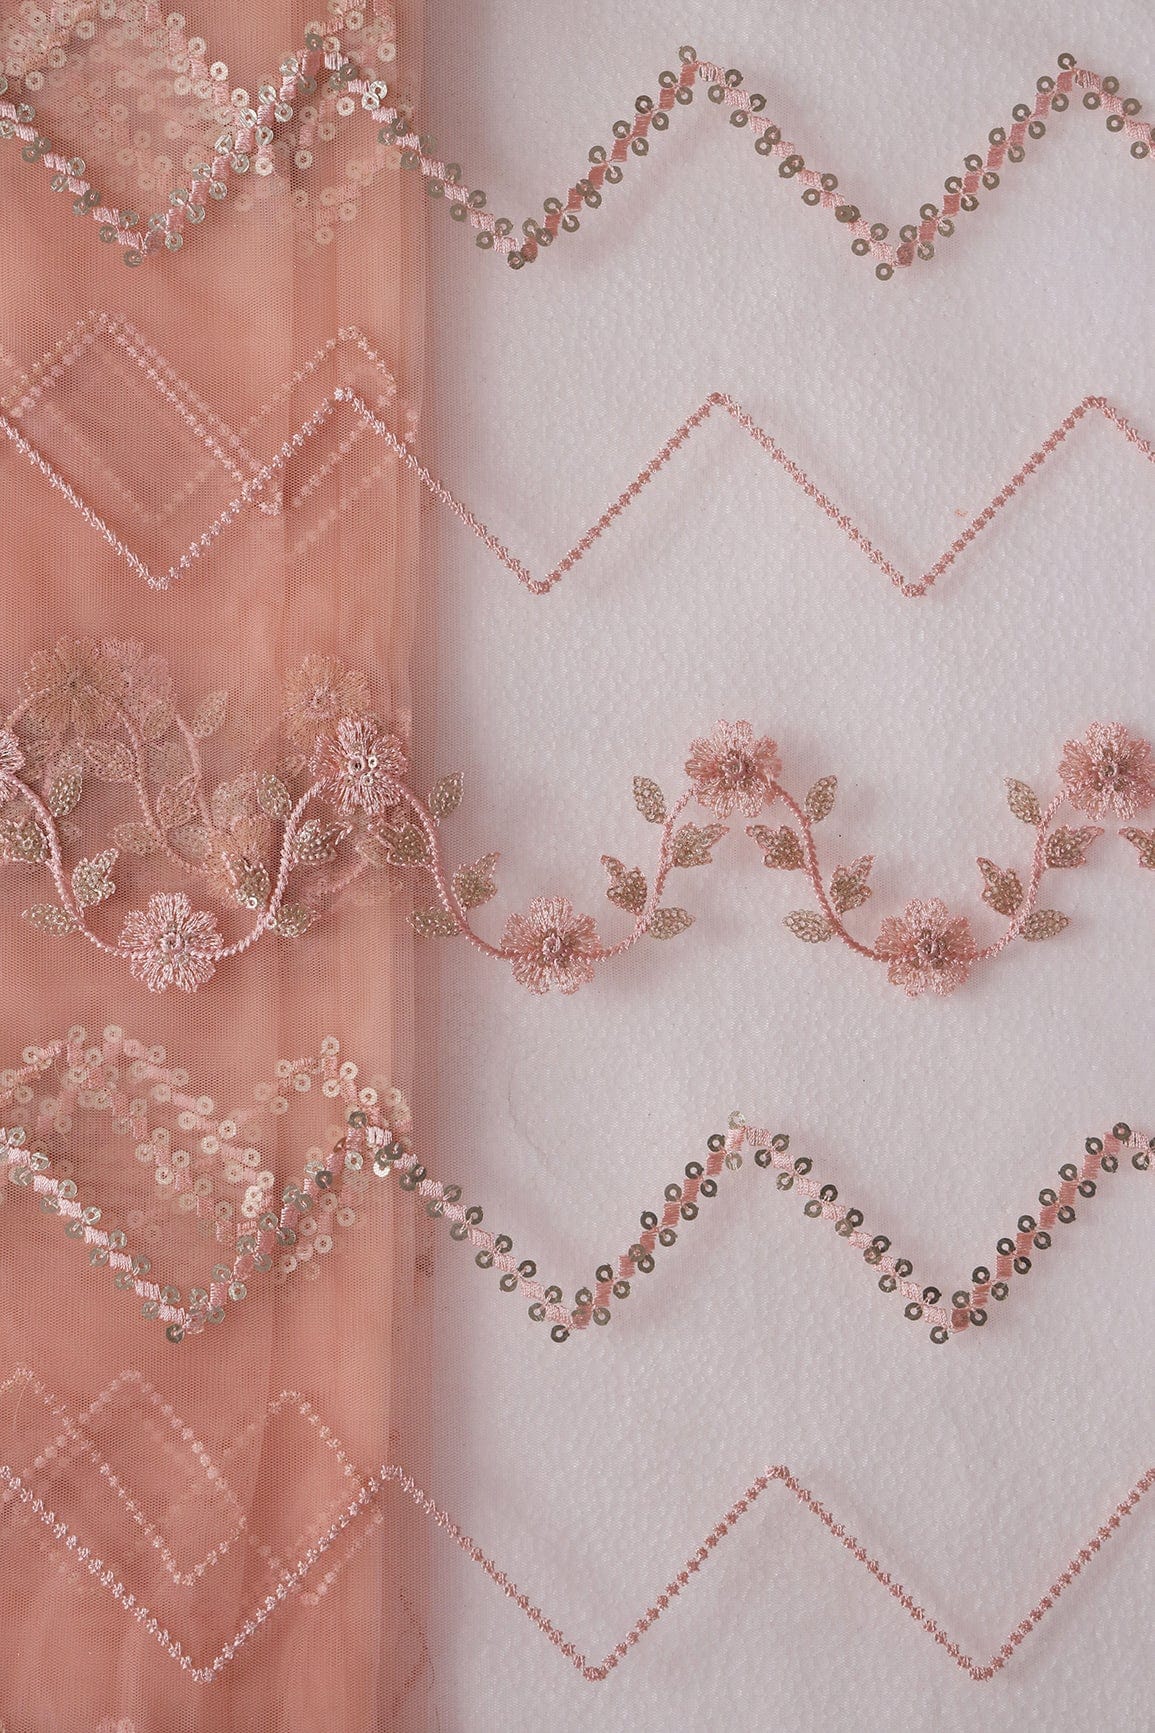 doeraa Embroidery Fabrics 2 Meter Cut Piece Of Gold Sequins With Peach Thread Chevron Embroidery Work On Peach Soft Net Fabric